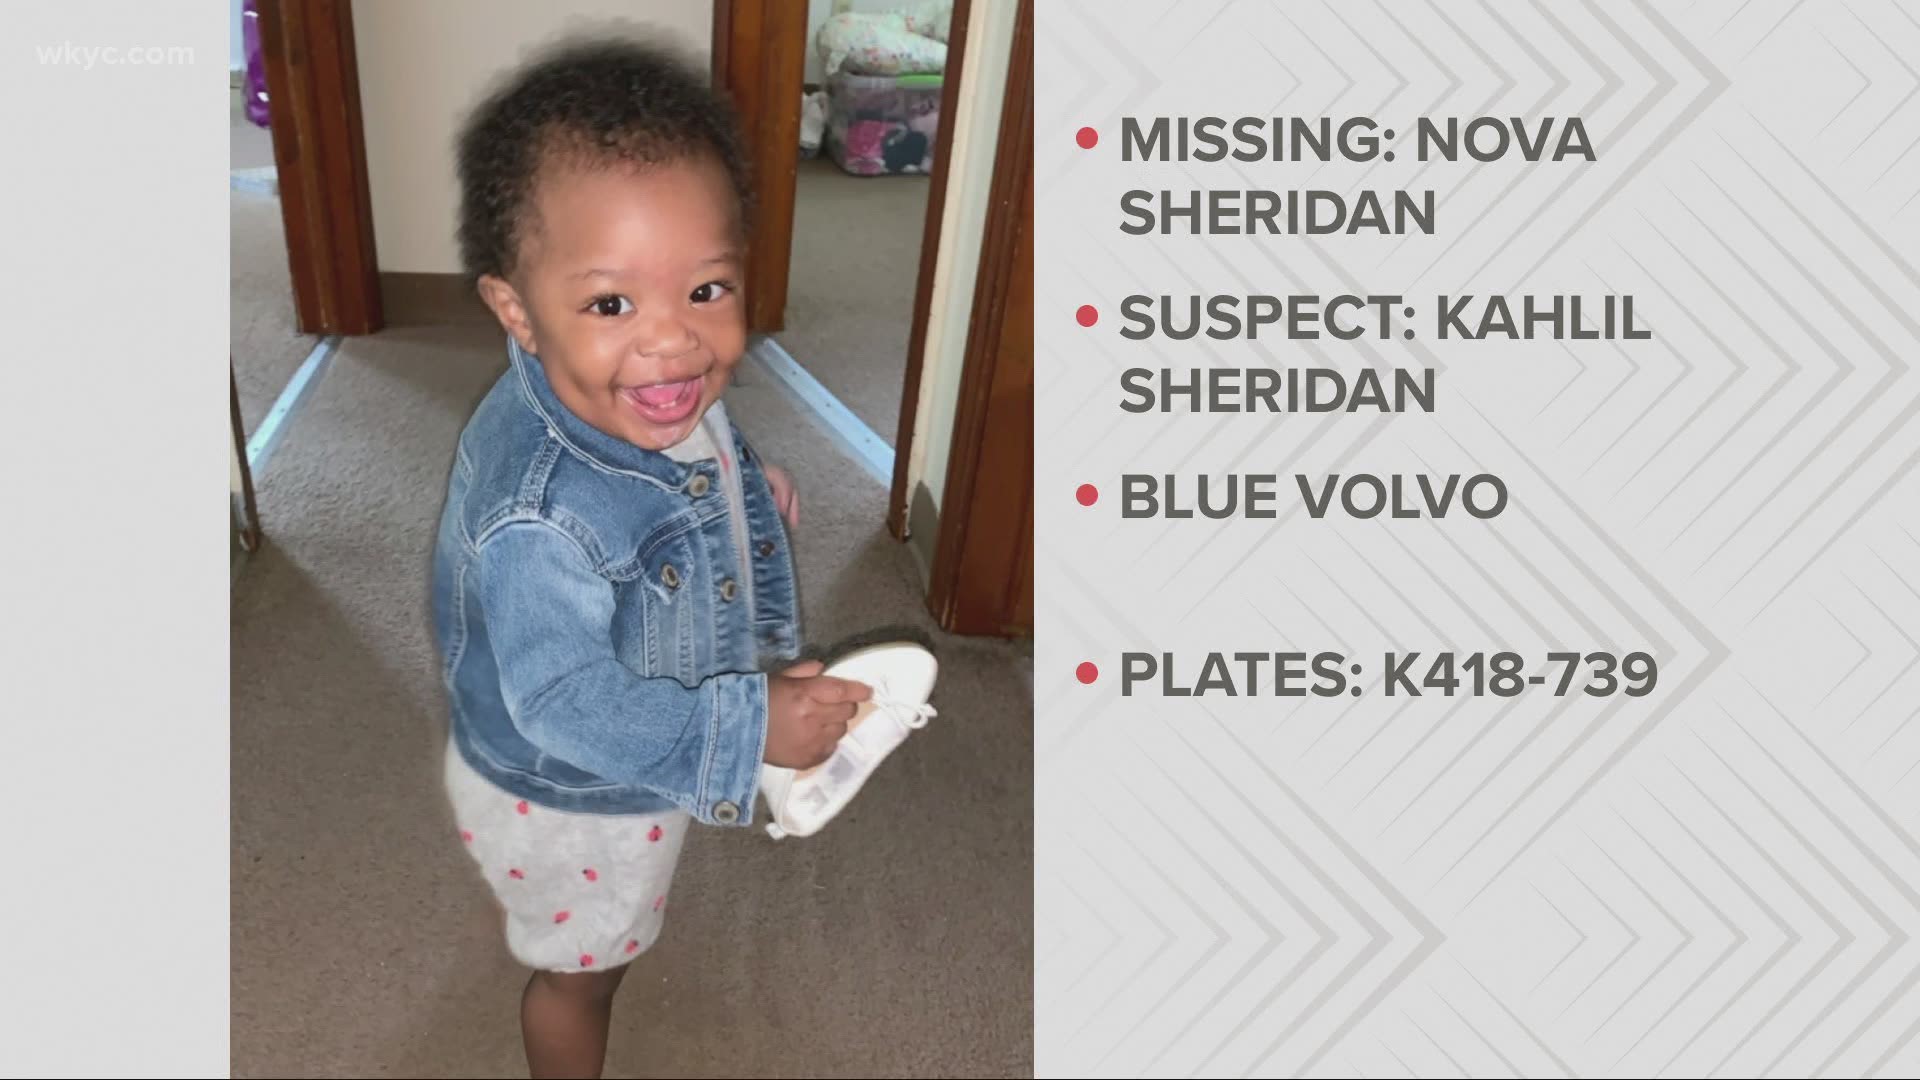 June 26, 2020: Authorities issued a statewide Amber Alert early this morning for a 1-year-old girl who police say was abducted from her mother's home in Youngstown.